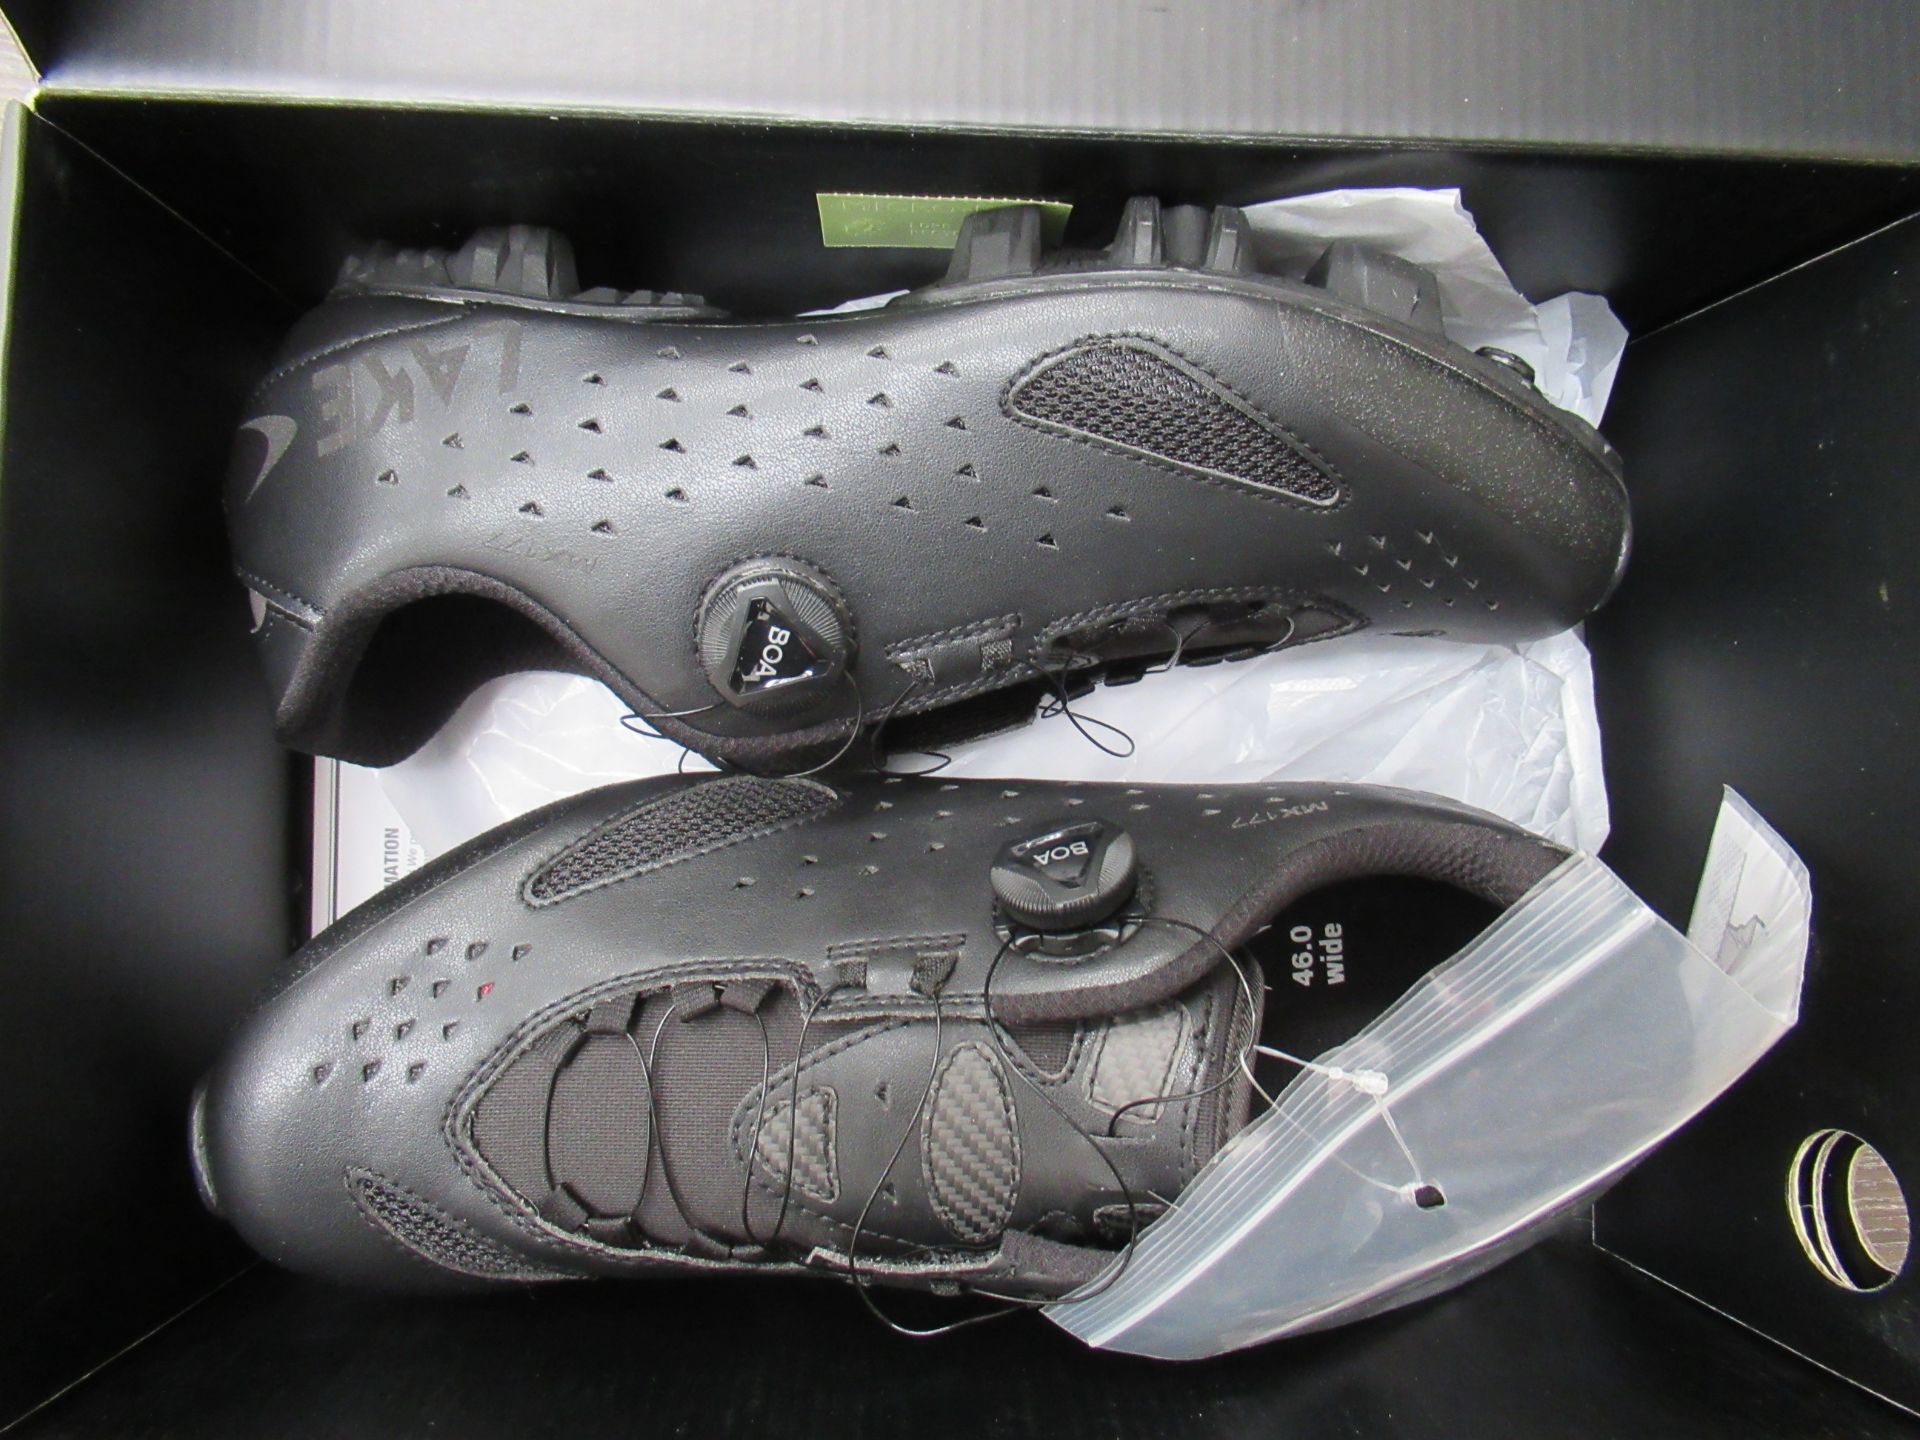 Pair of Lake MX177-X cycling shoes (black/black reflective) - boxed EU size 46 - (RRP£150) - Image 4 of 4